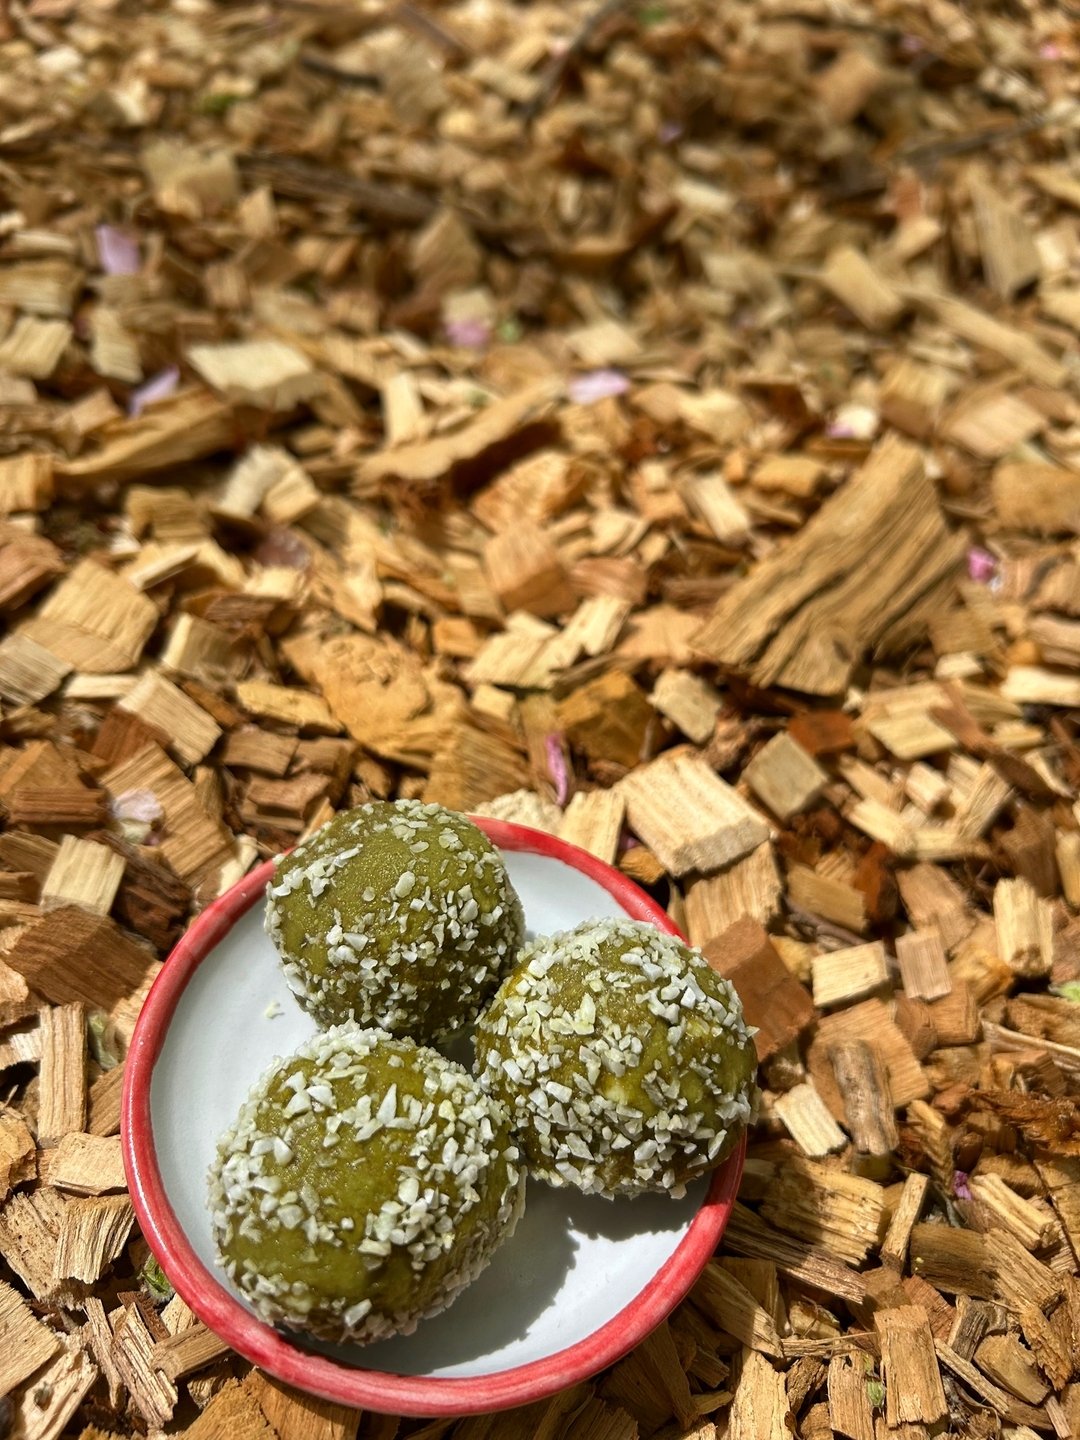 Matcha bites w/ white chocolate, almonds, and covered in coconut flakes🍵

The prefect sweet treat for the spring season.🤤